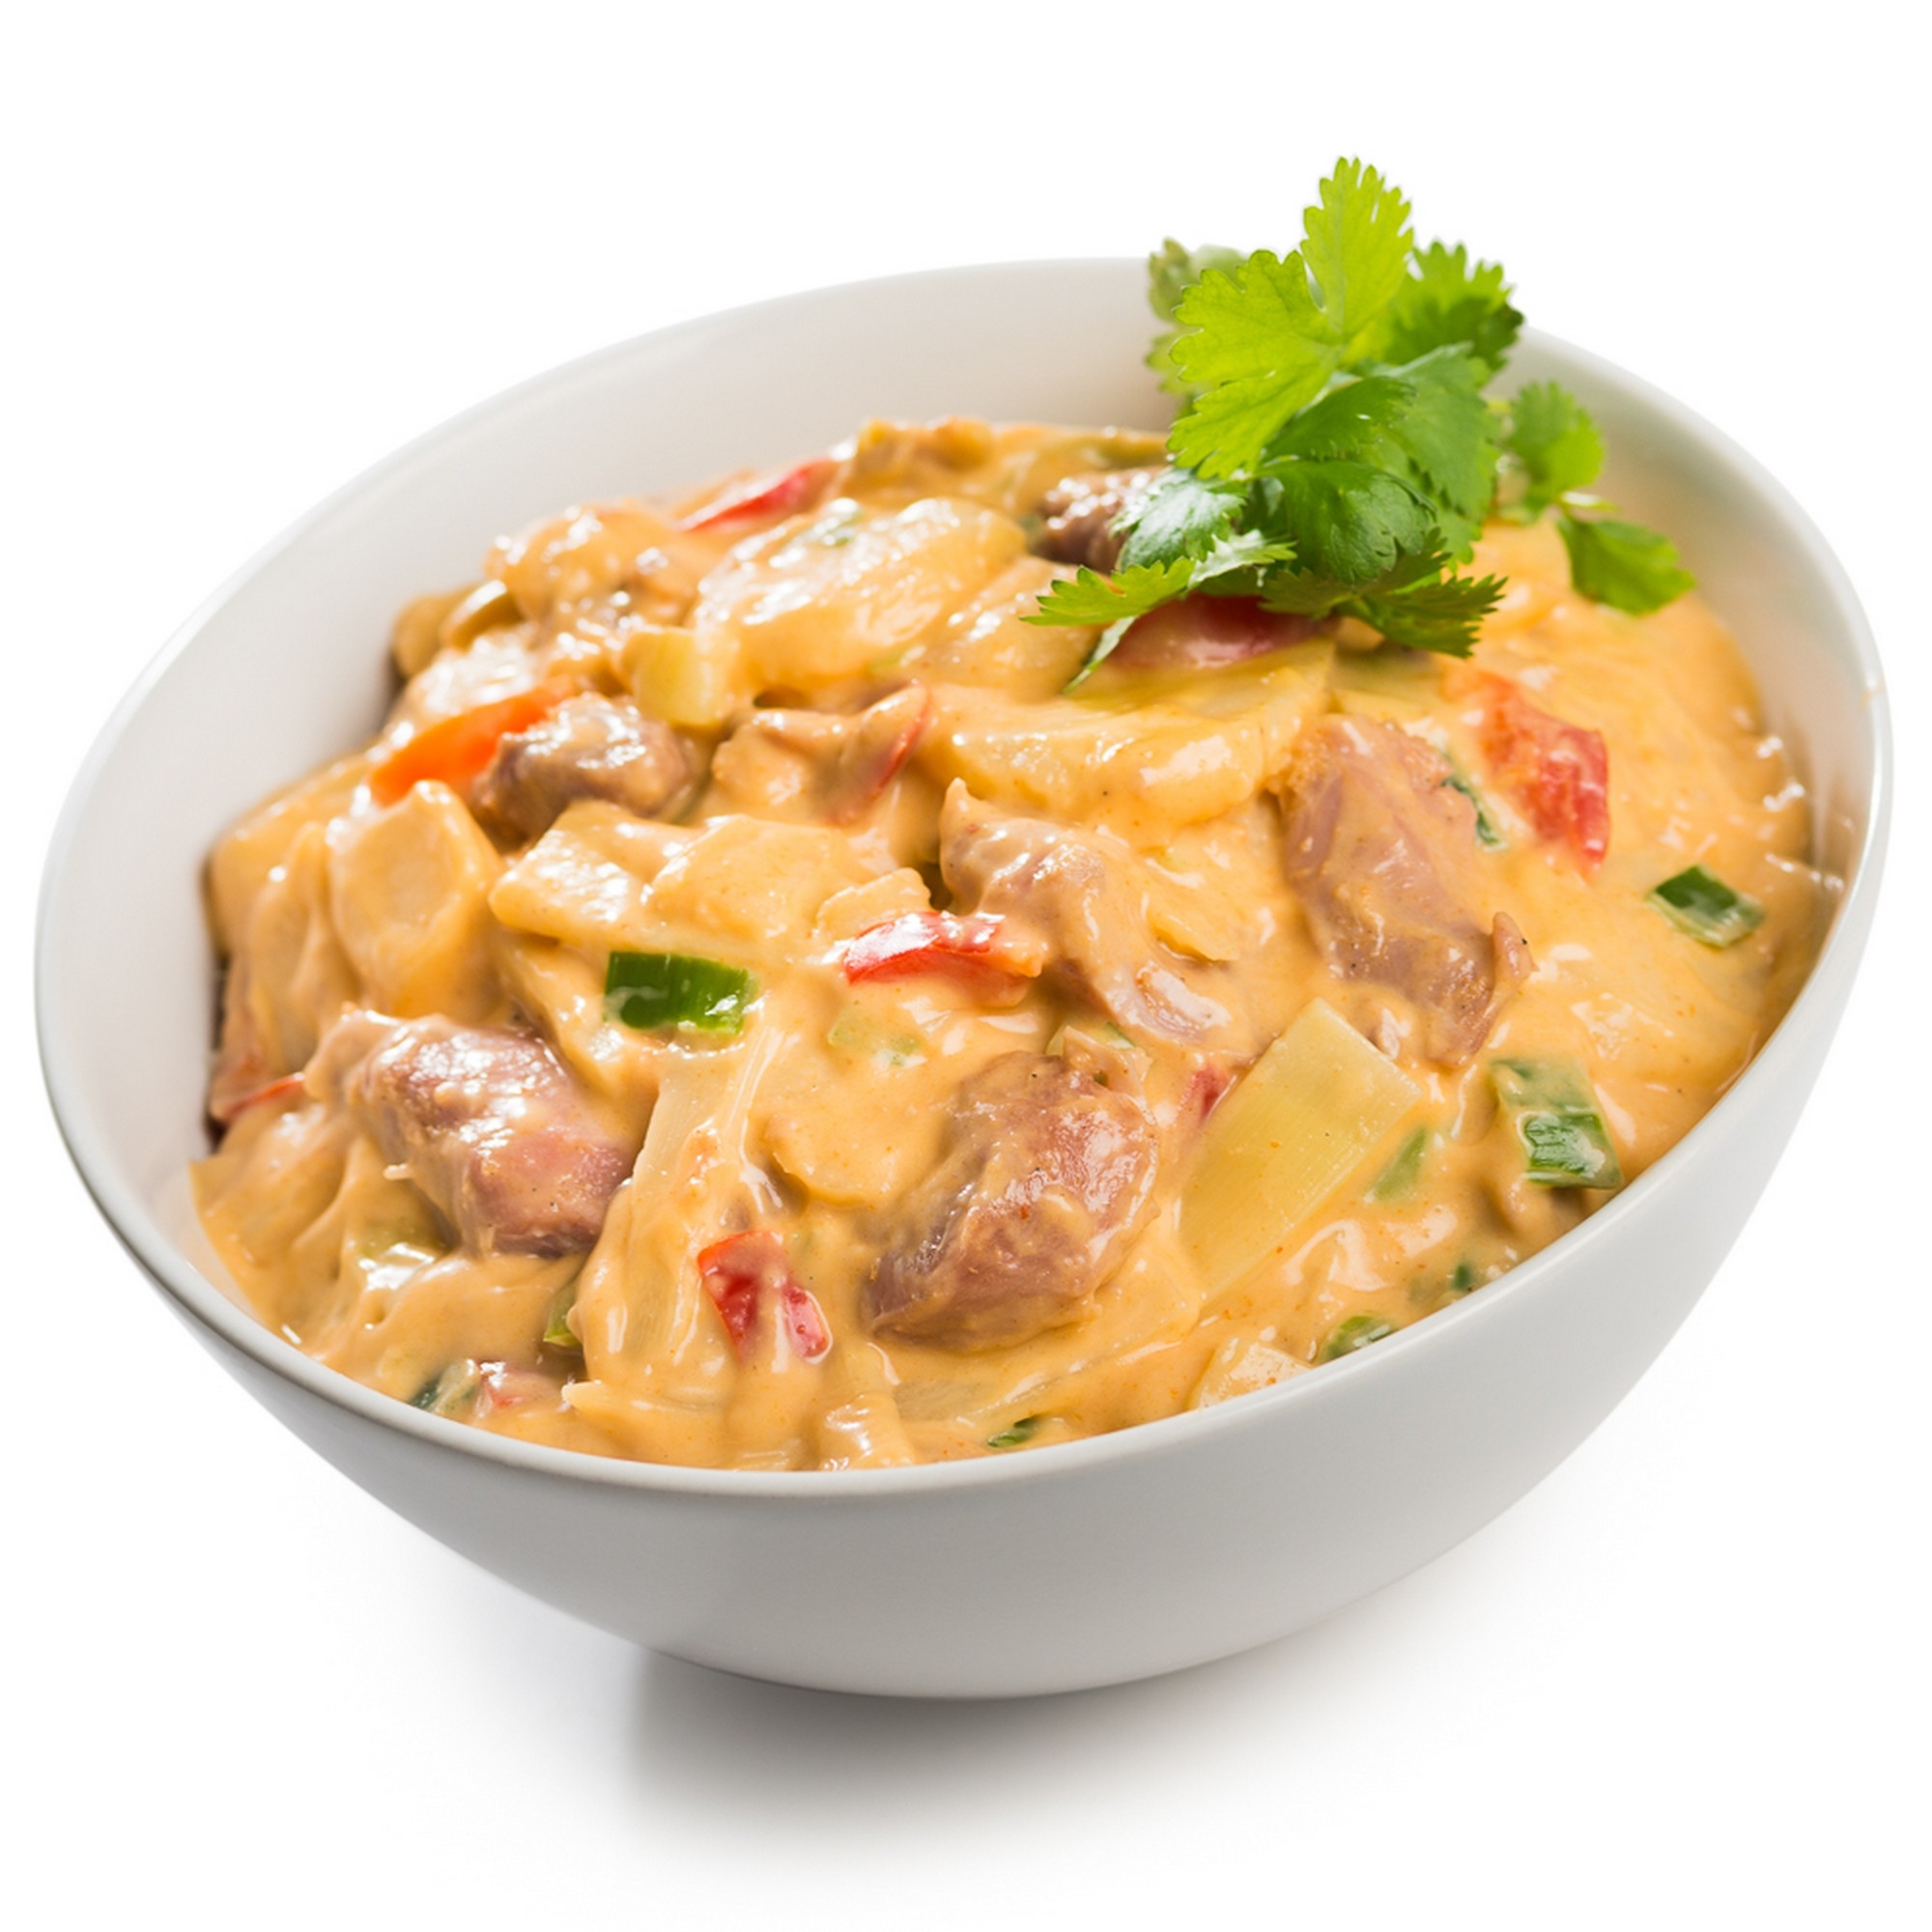 Holmens kylling red curry 2kg